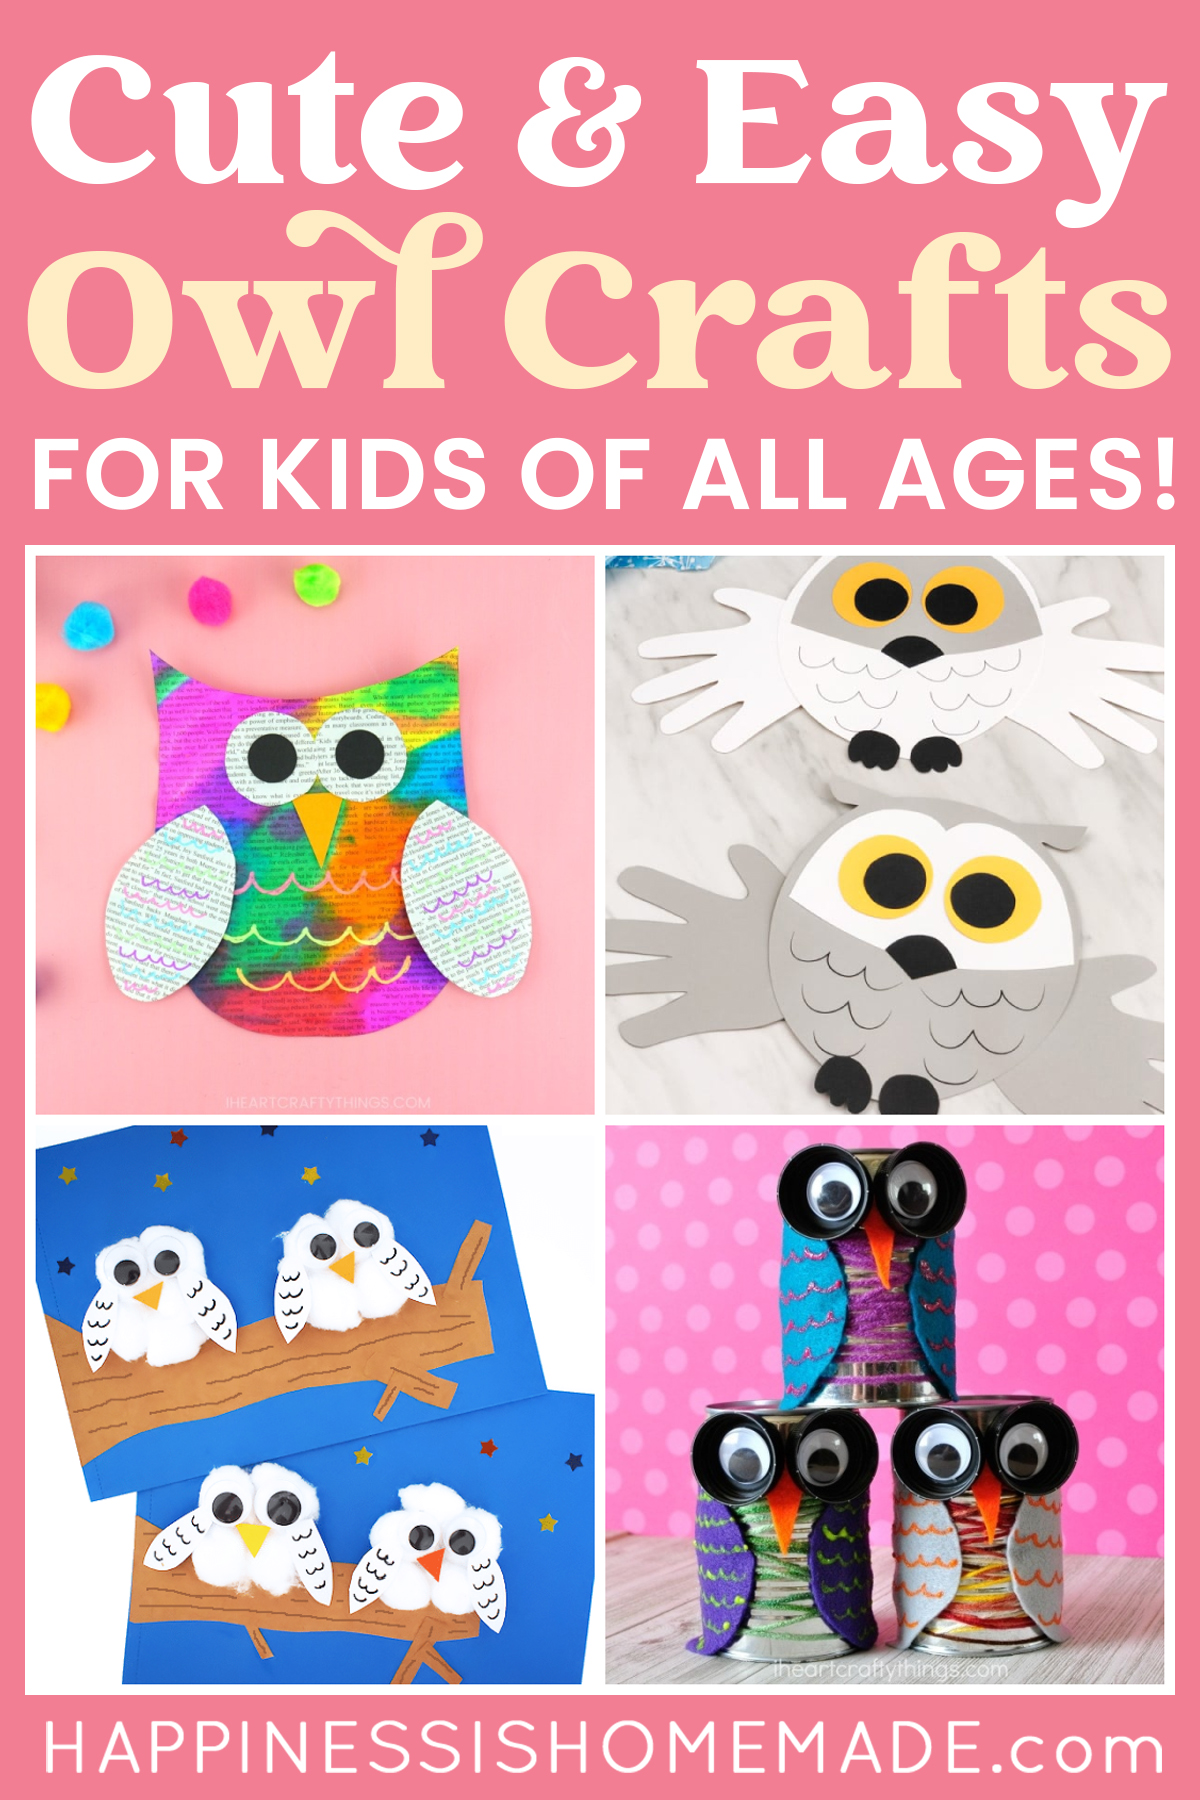 Cotton Ball Snowy Owl Craft - Our Kid Things